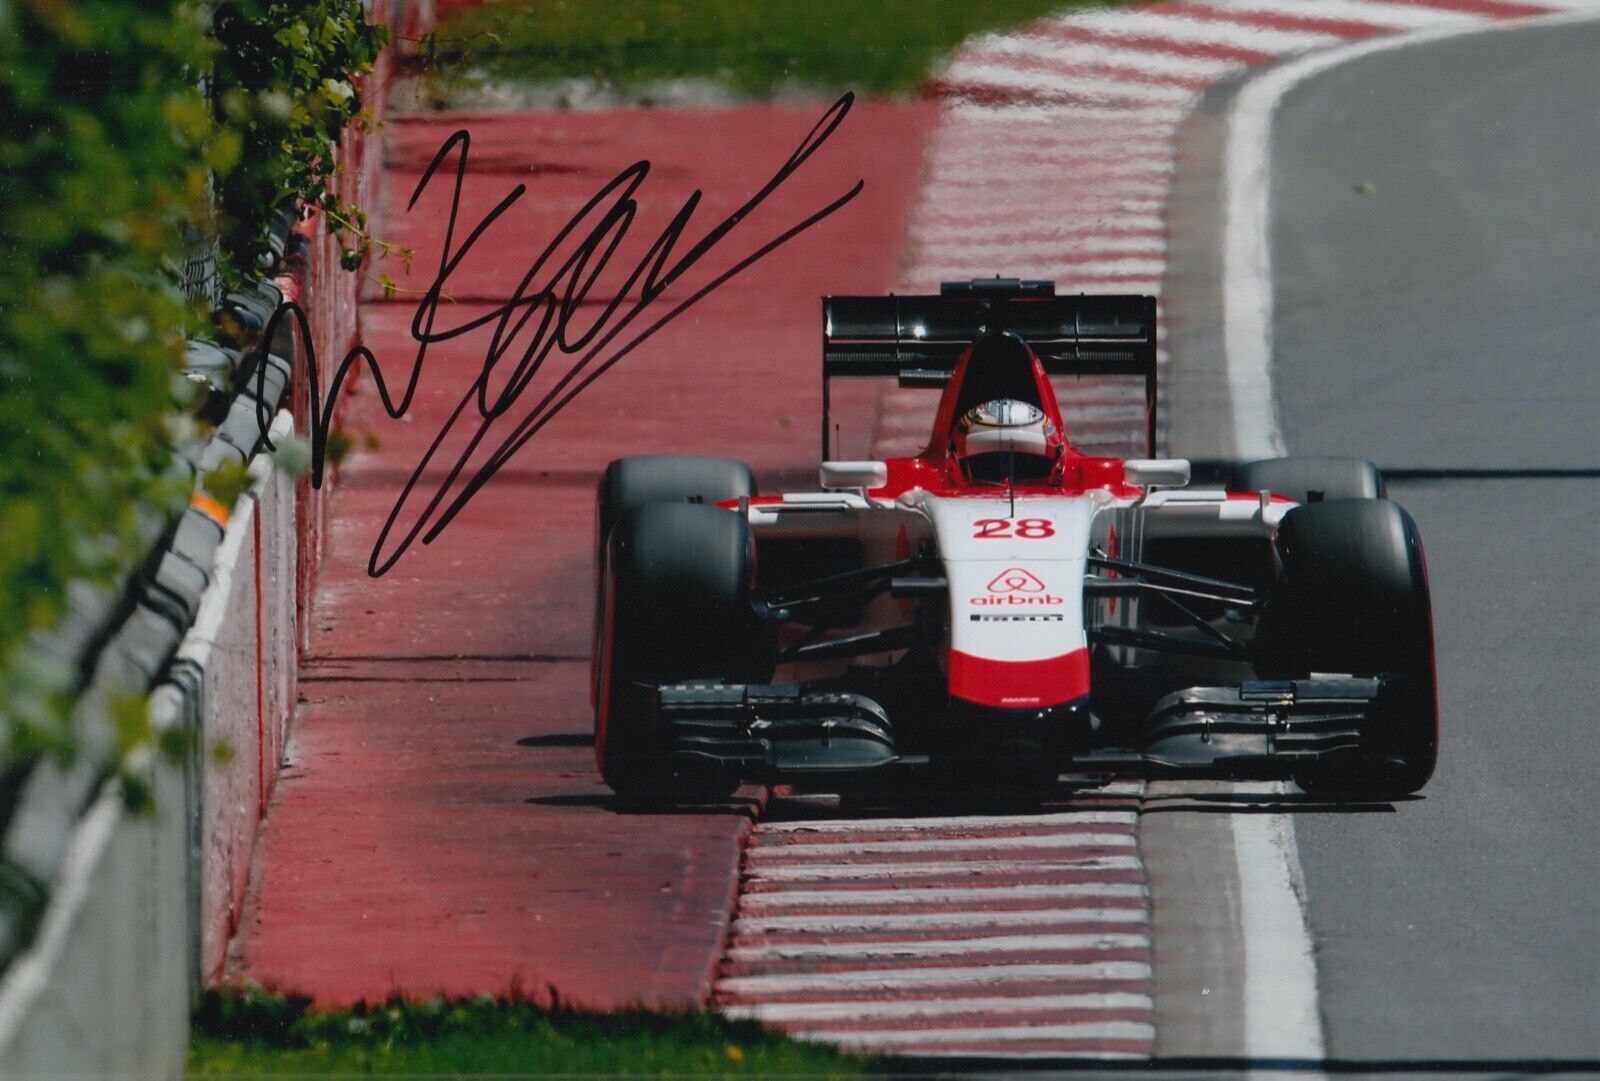 Will Stevens Hand Signed 12x8 Photo Poster painting F1 Autograph Manor Marussia 2